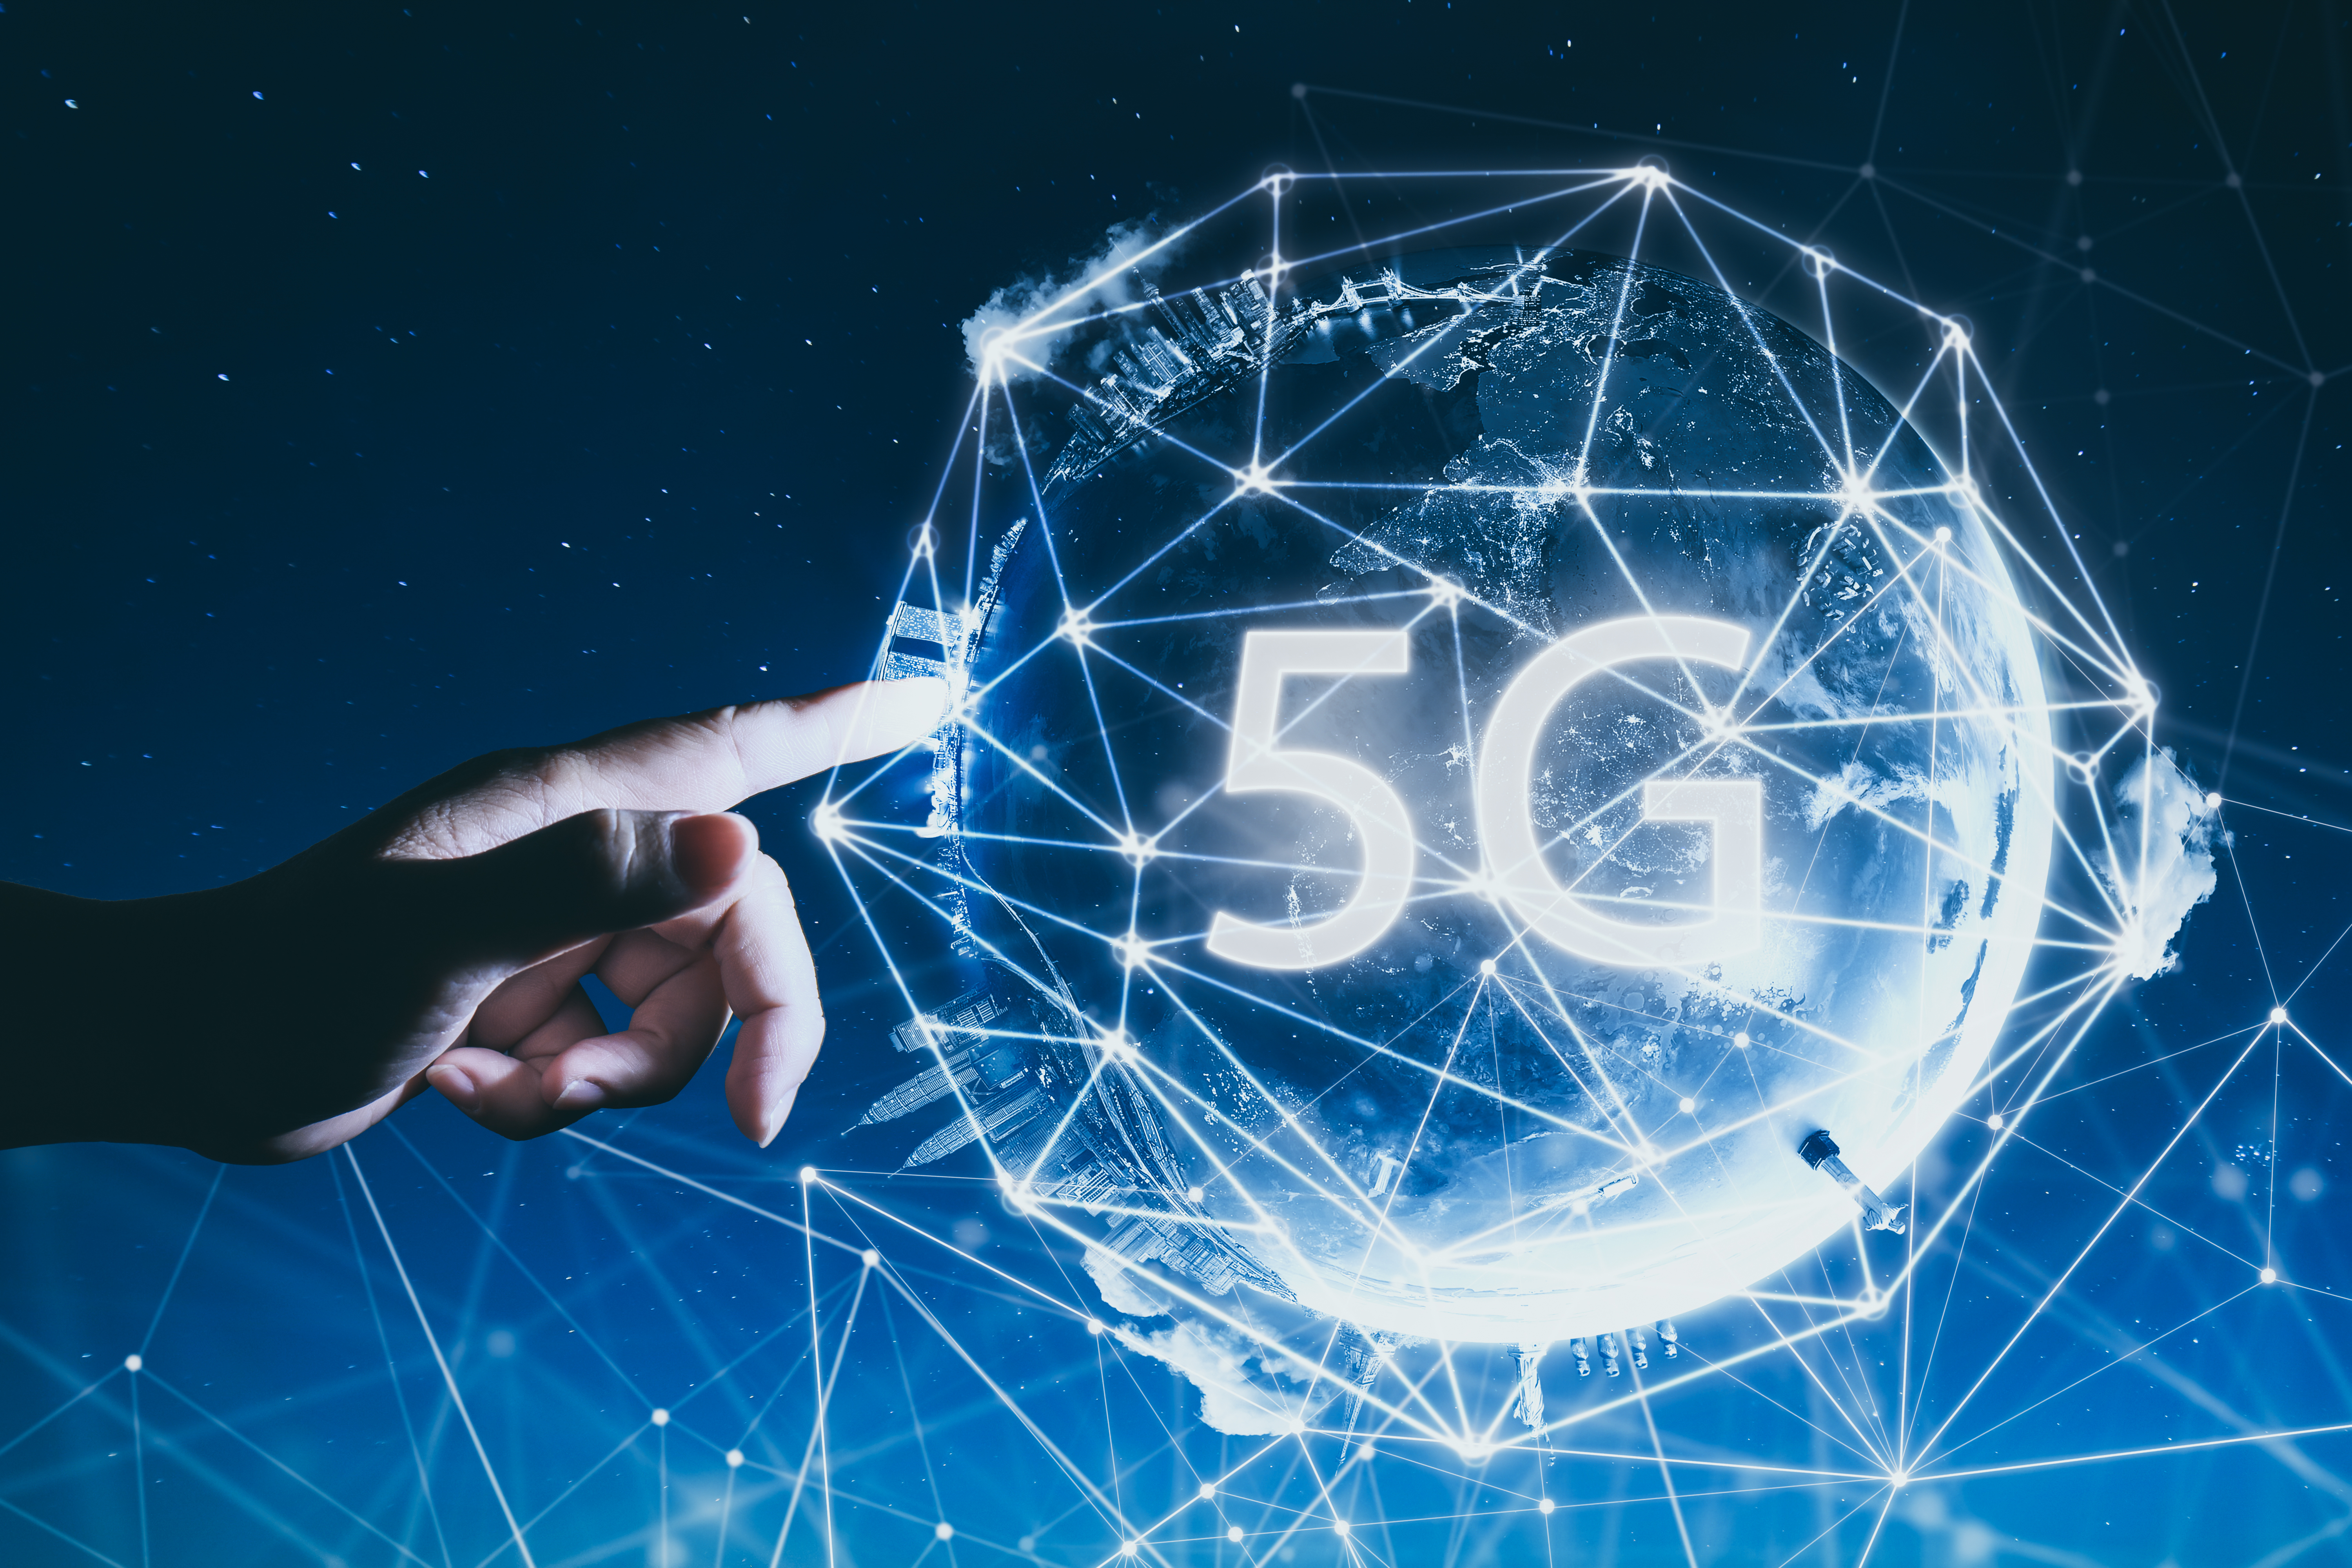 5G and the Internet of Things prove to be the most attractive investment options